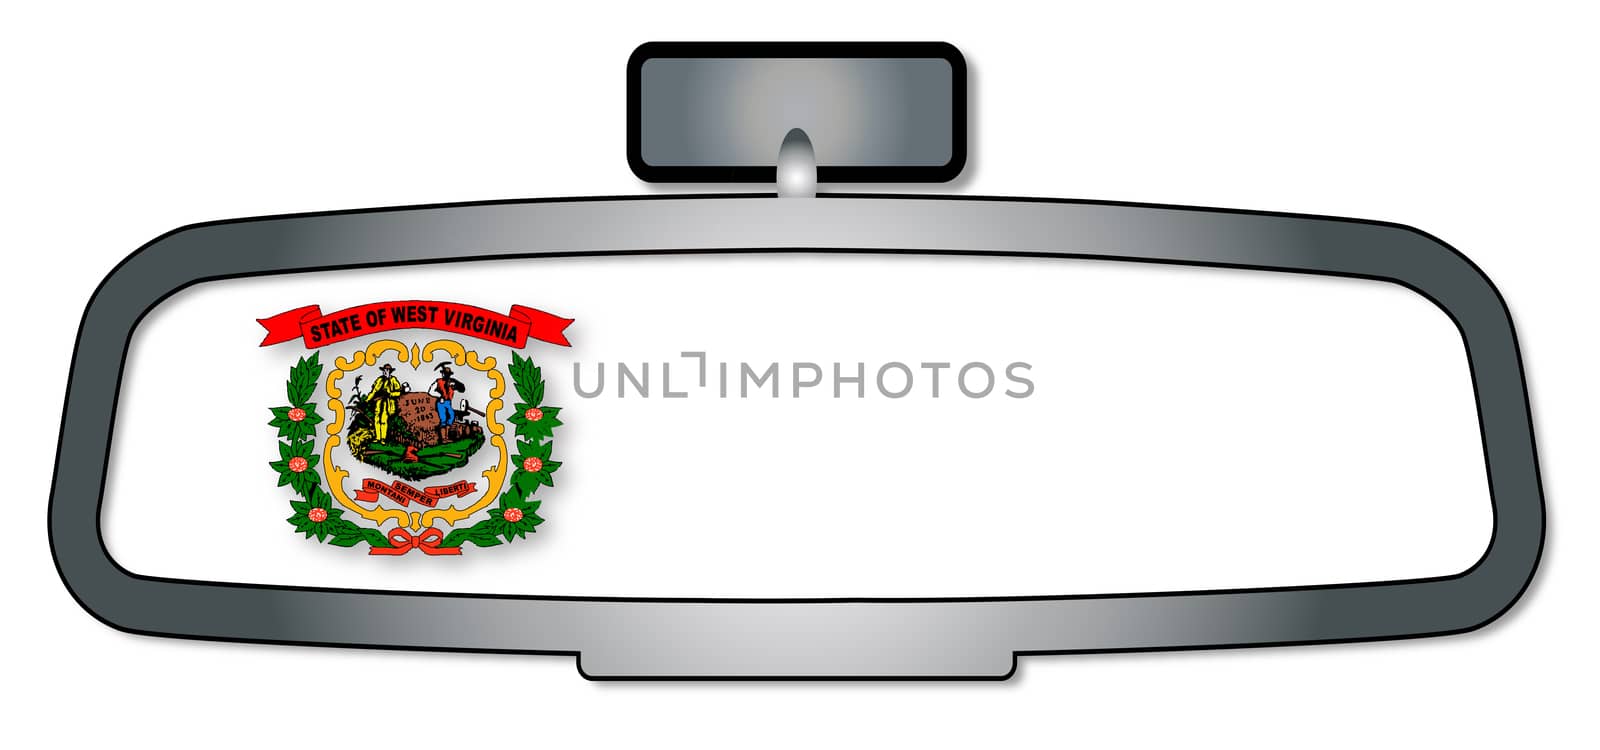 A vehicle rear view mirror with the flag of the state of West Virginia